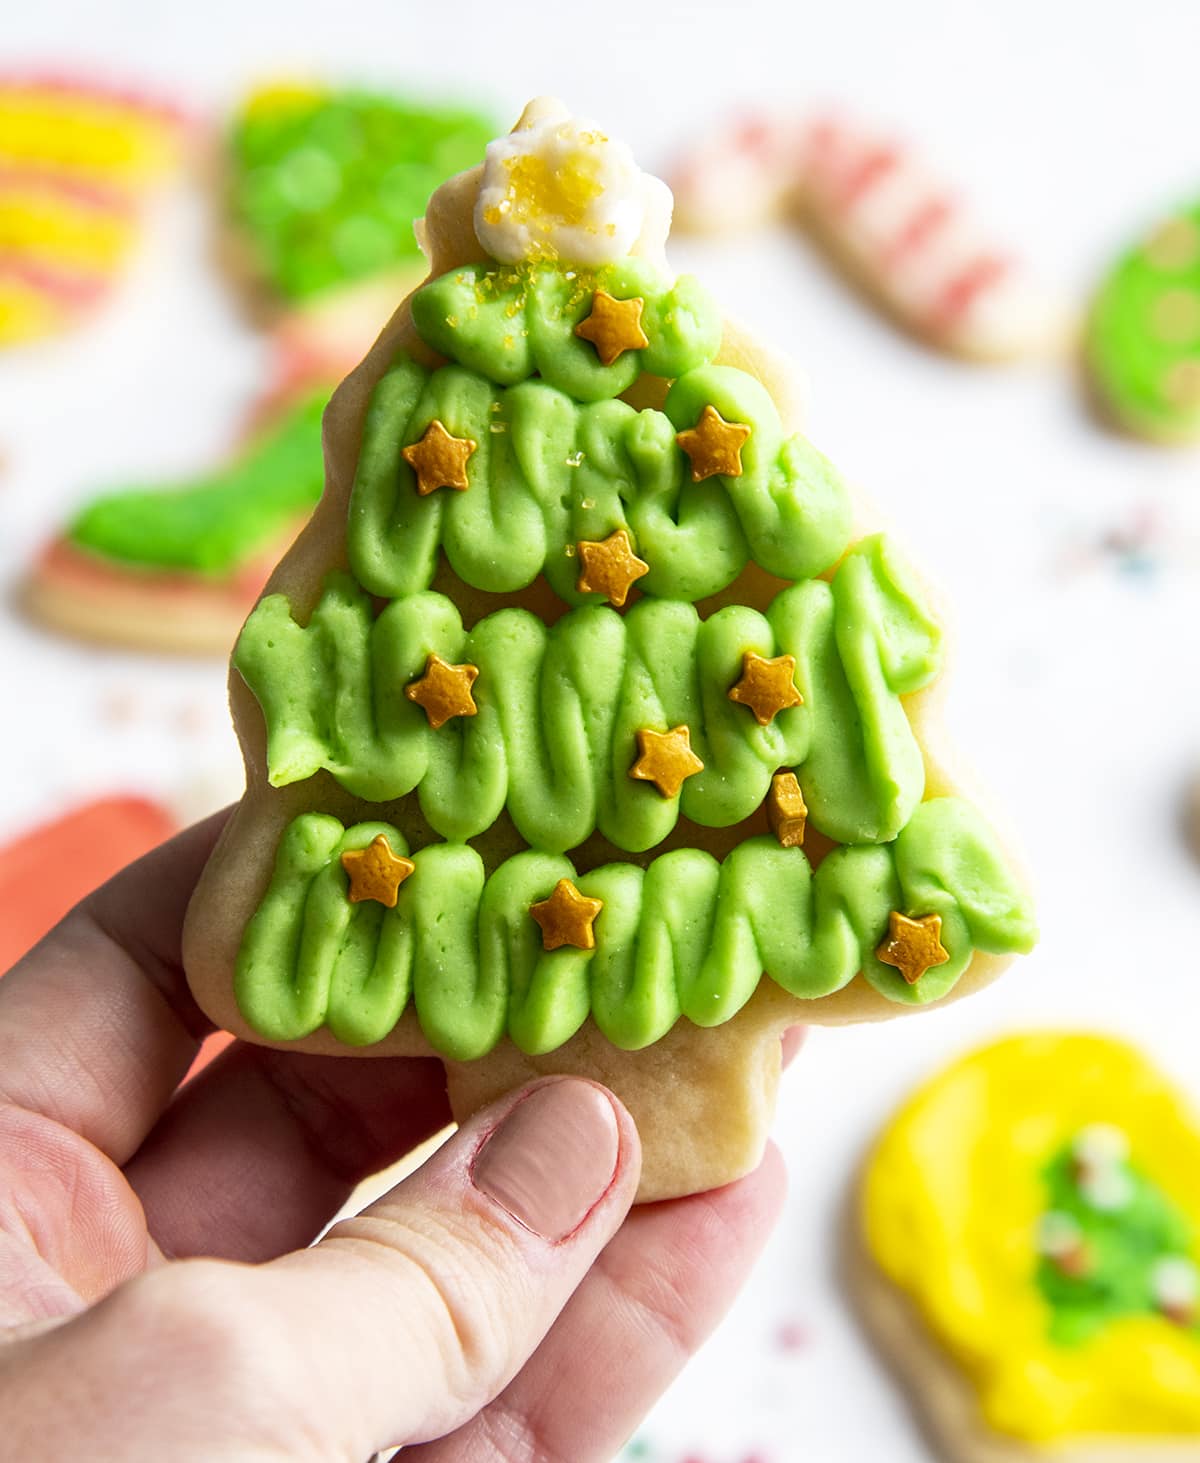 A hand holding a Christmas tree decorated sugar cookie with green frosting and star sprinkles.